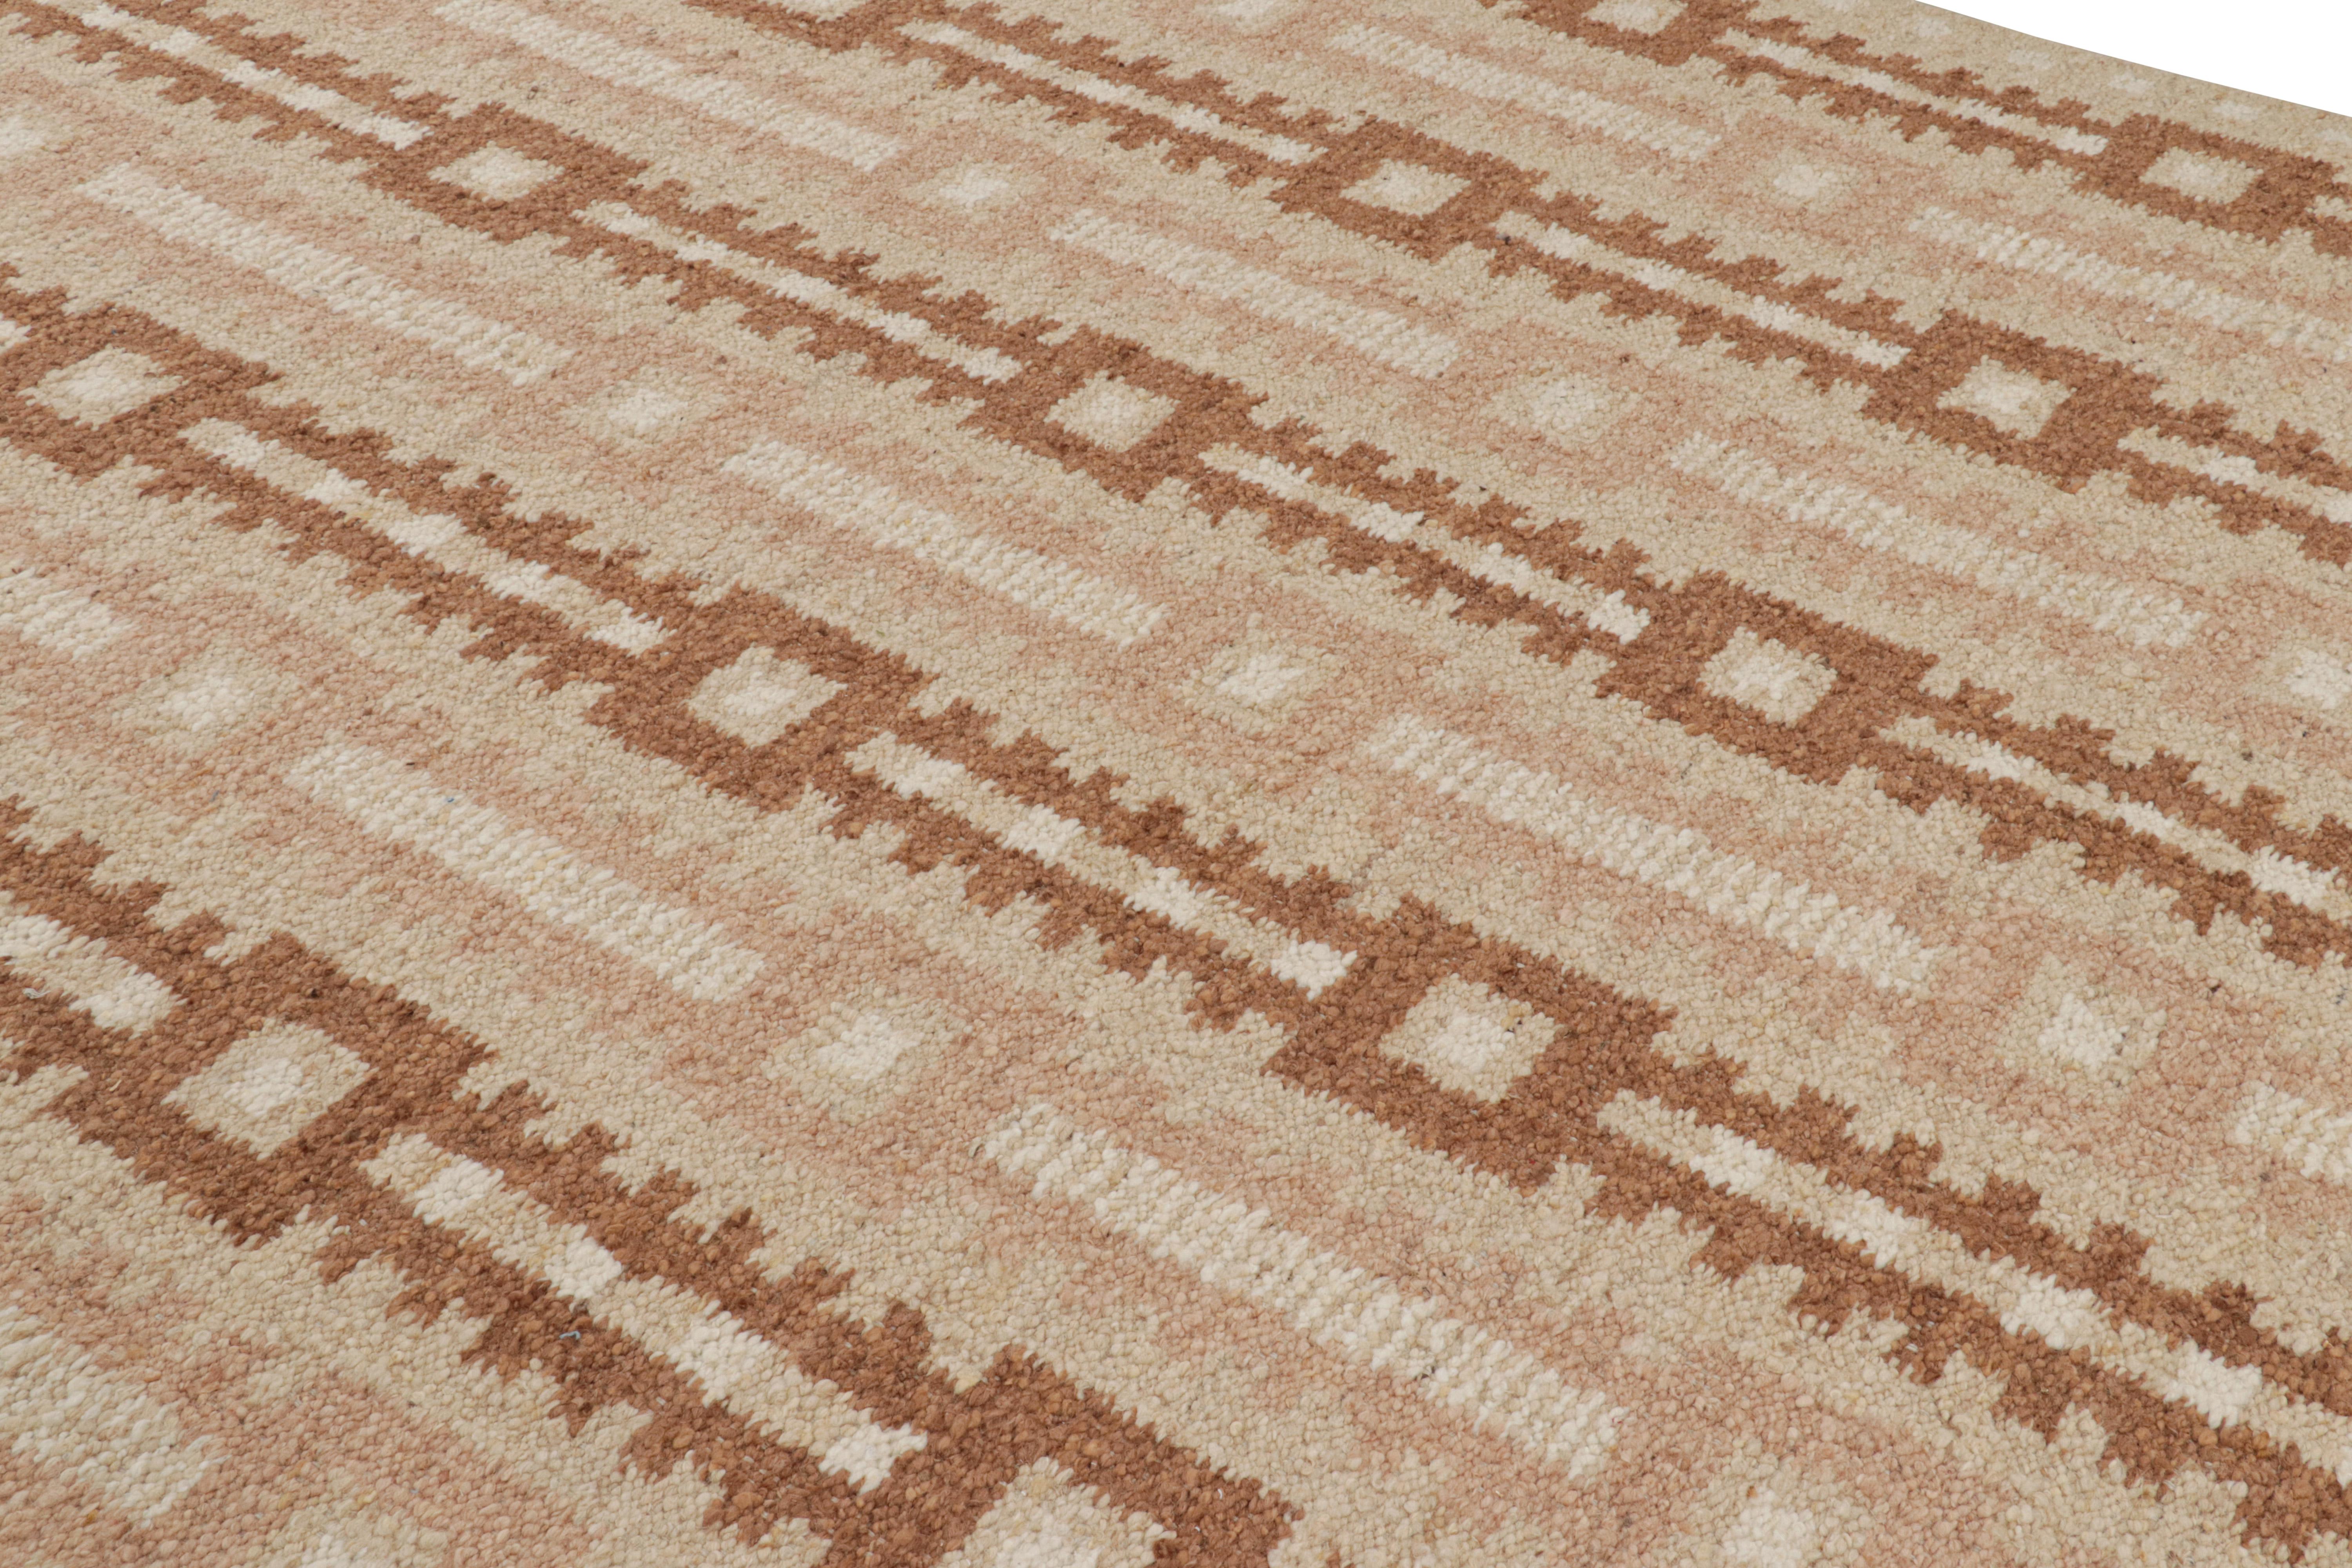 This 9x11 Swedish-style rug, handwoven in a wool flatweave, is from the inventive “Nu” texture in Rug & Kilim’s award-winning Scandinavian flat weave collection. 

On the Design: 

“Nu” enjoys a boucle-like texture of blended yarns, and a look both